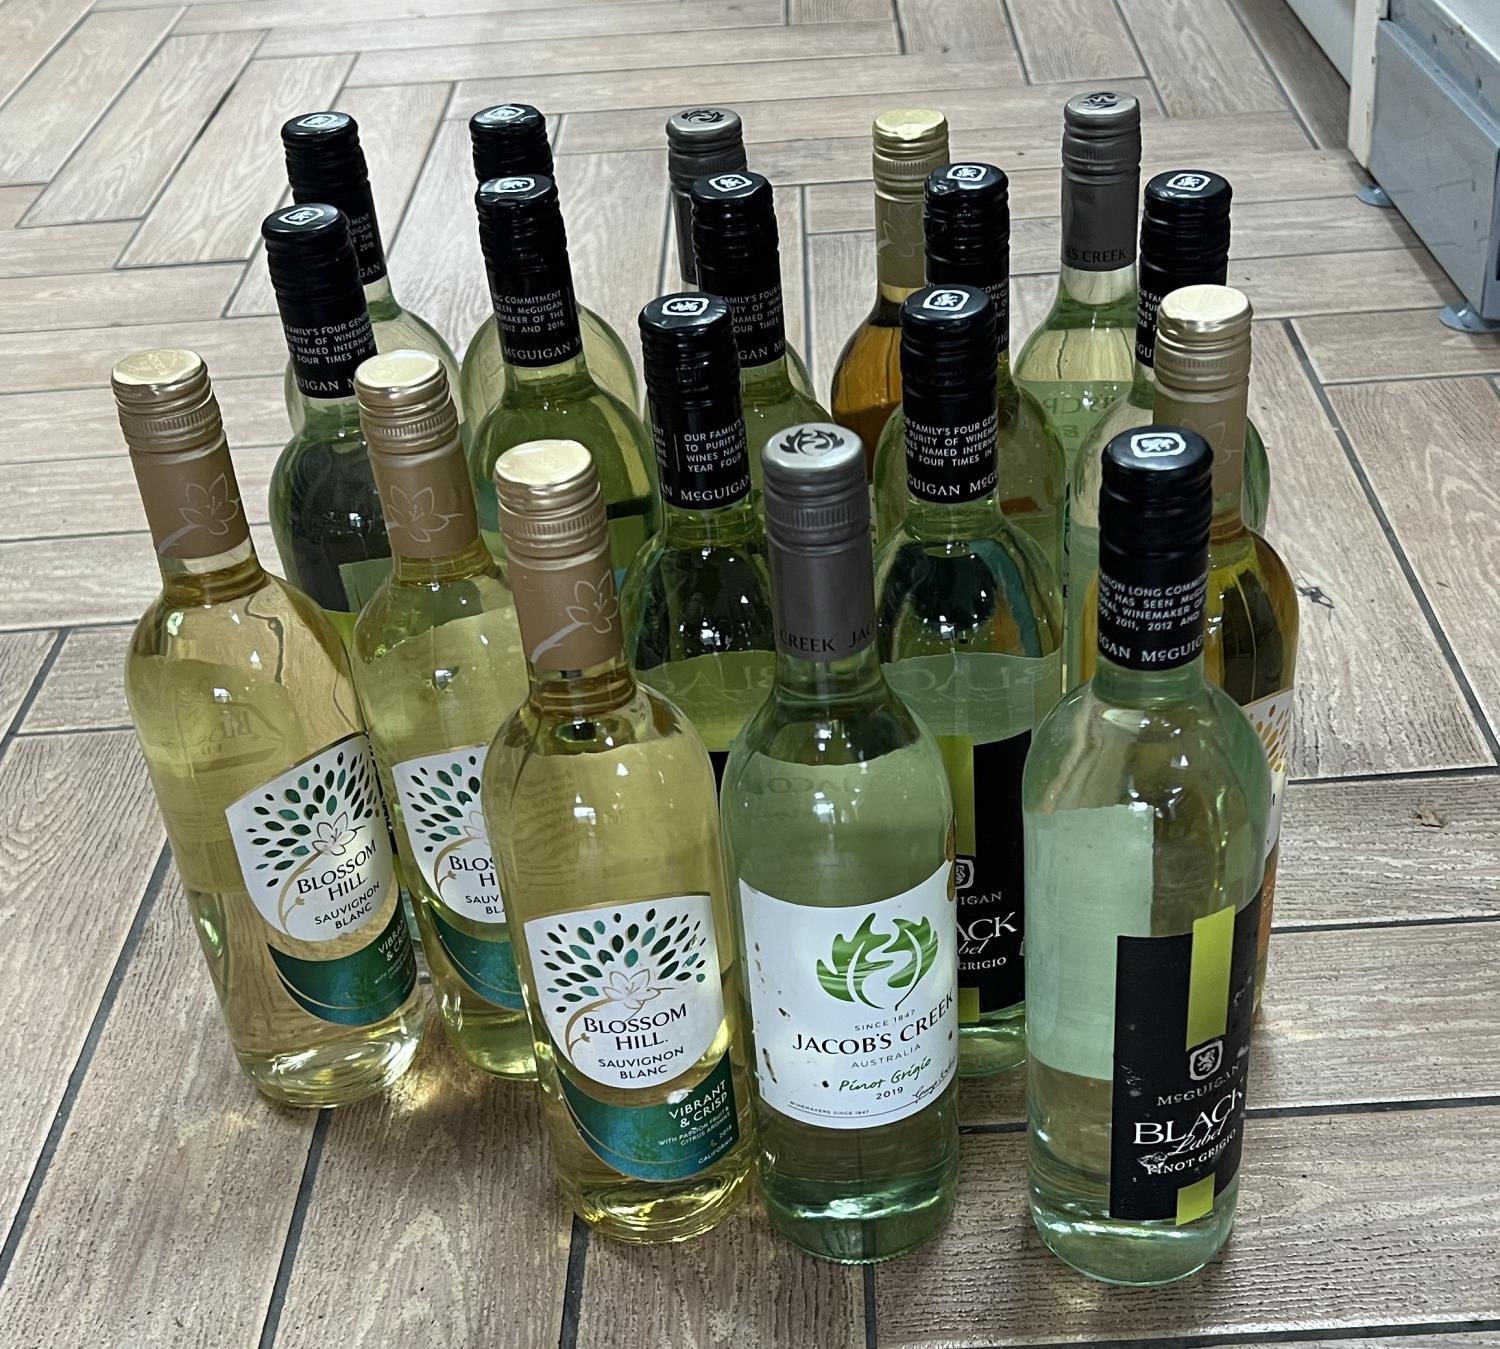 18 bottles of white wine to include Jacobs creek, Mcguigan, Blossom hill